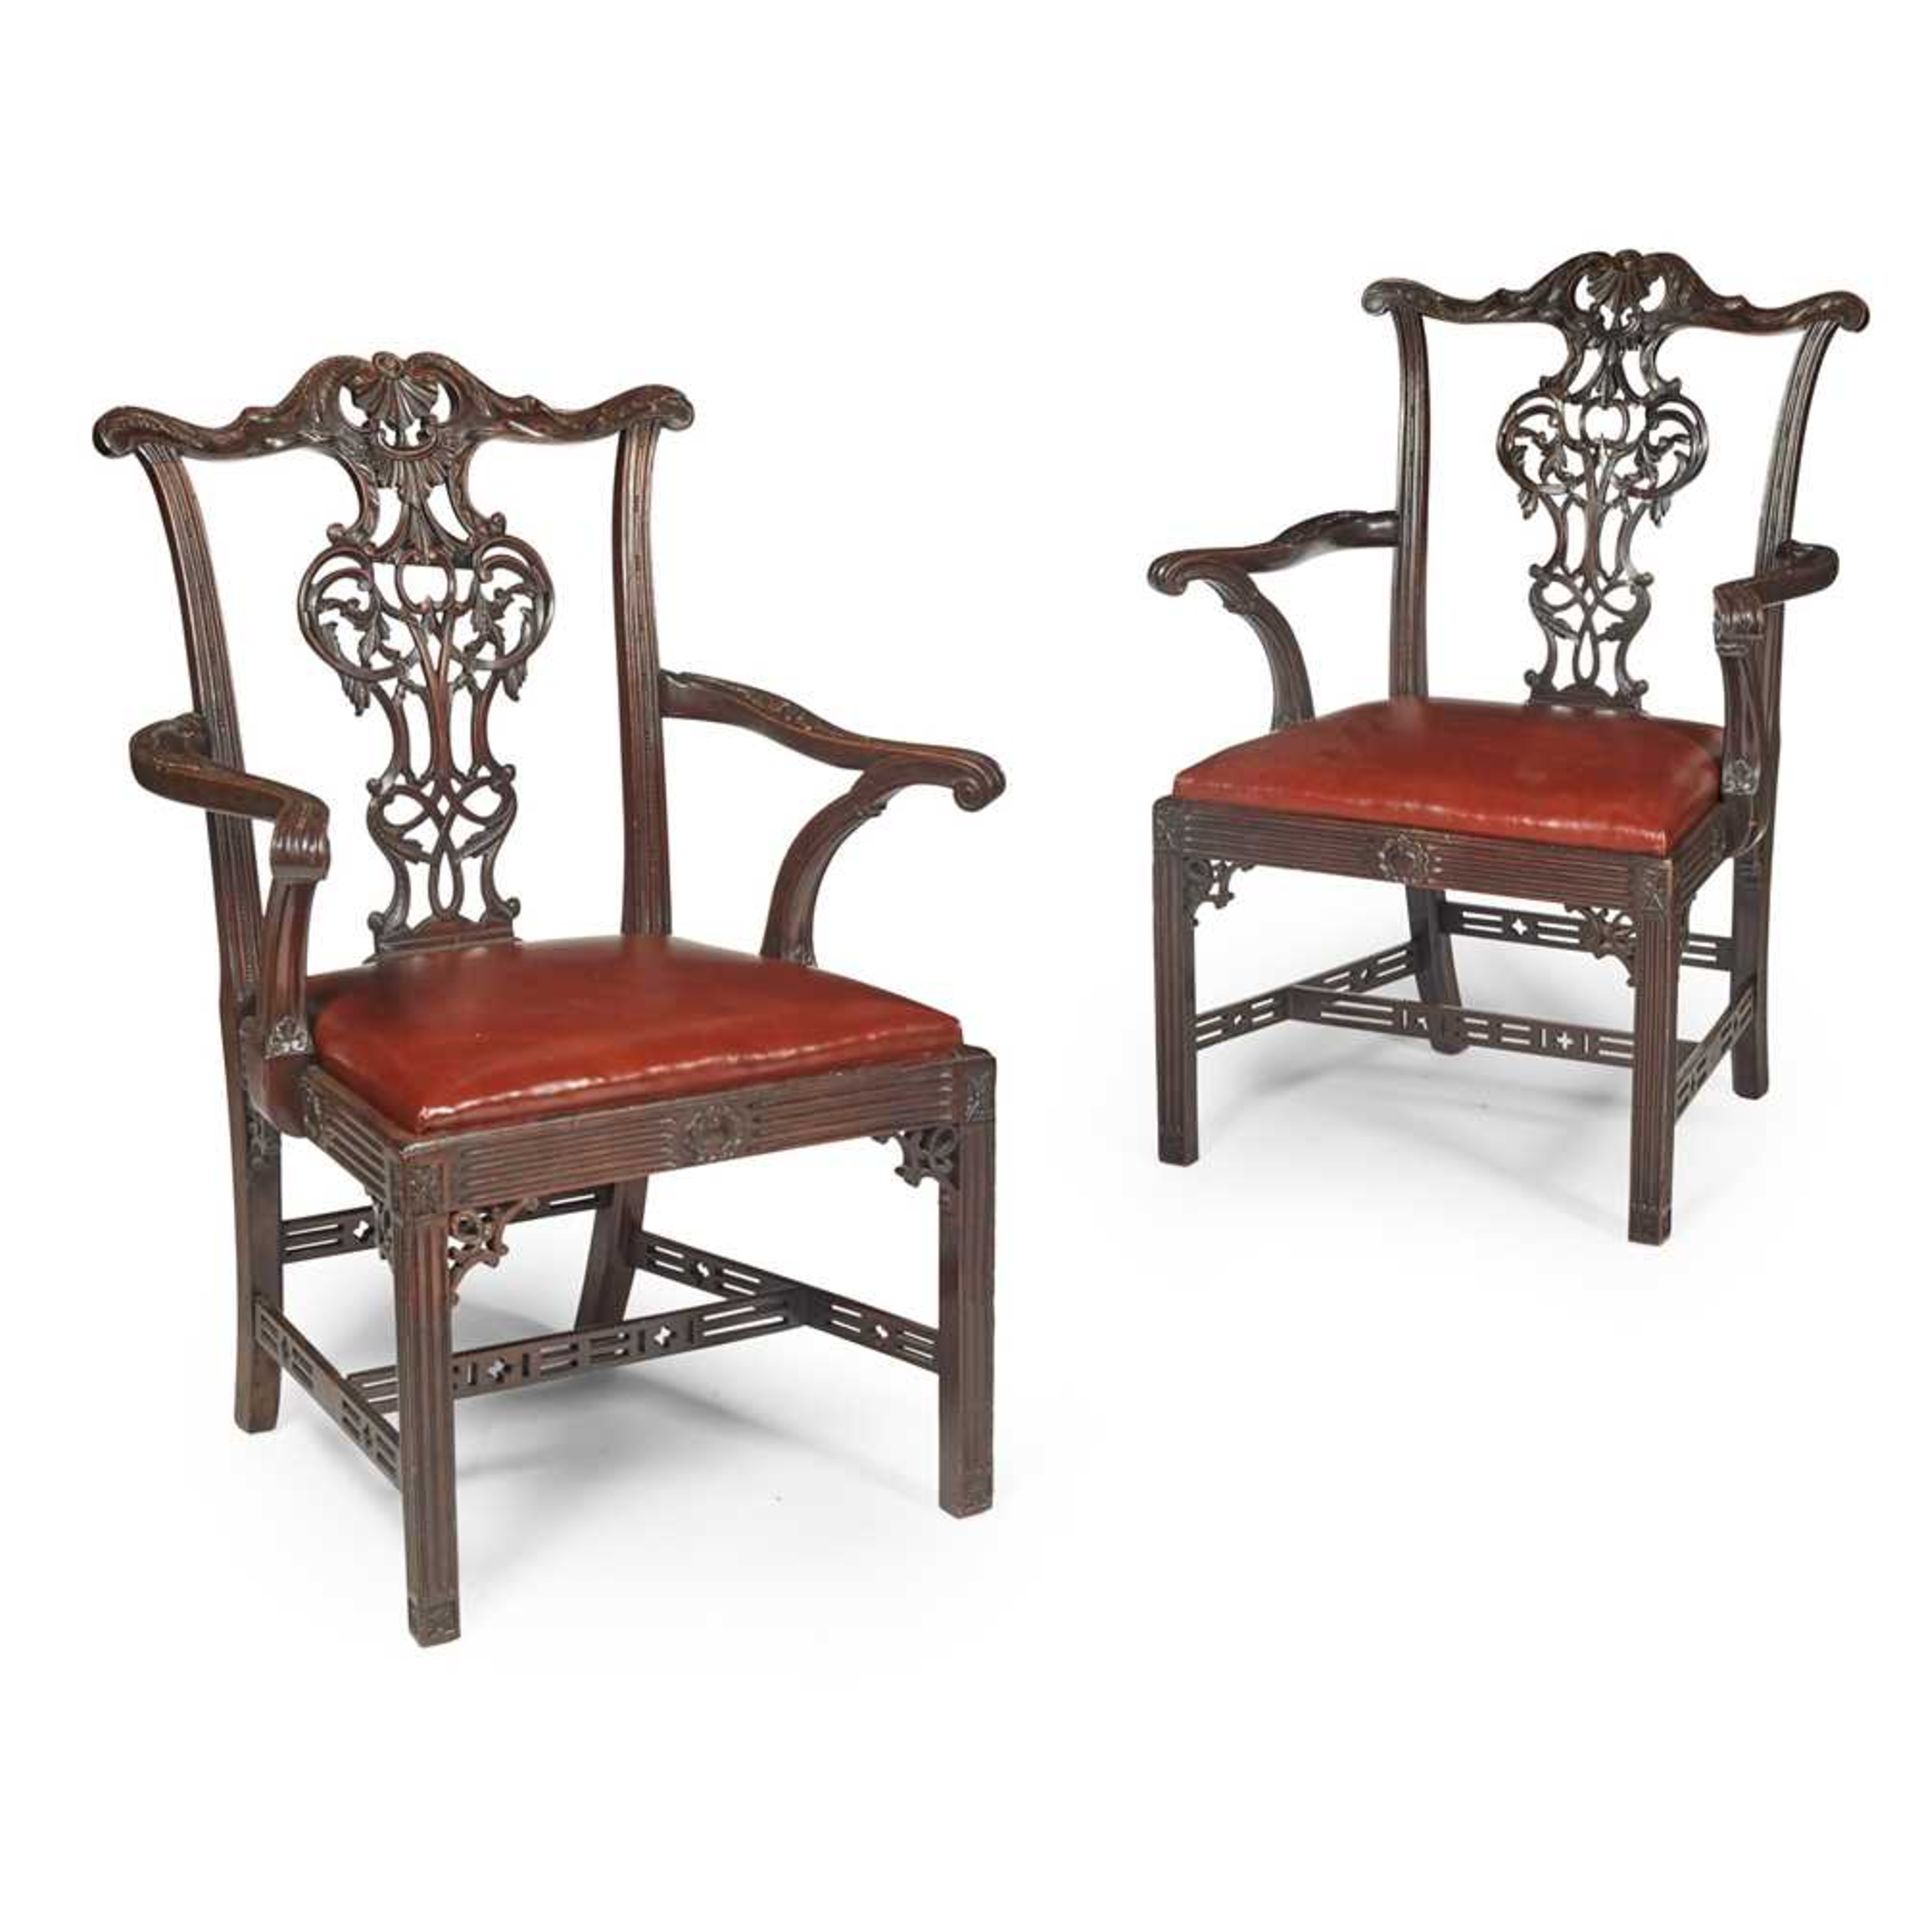 FINE SET OF EIGHT CHIPPENDALE STYLE MAHOGANY DINING CHAIRS LATE 19TH CENTURY - Image 2 of 3